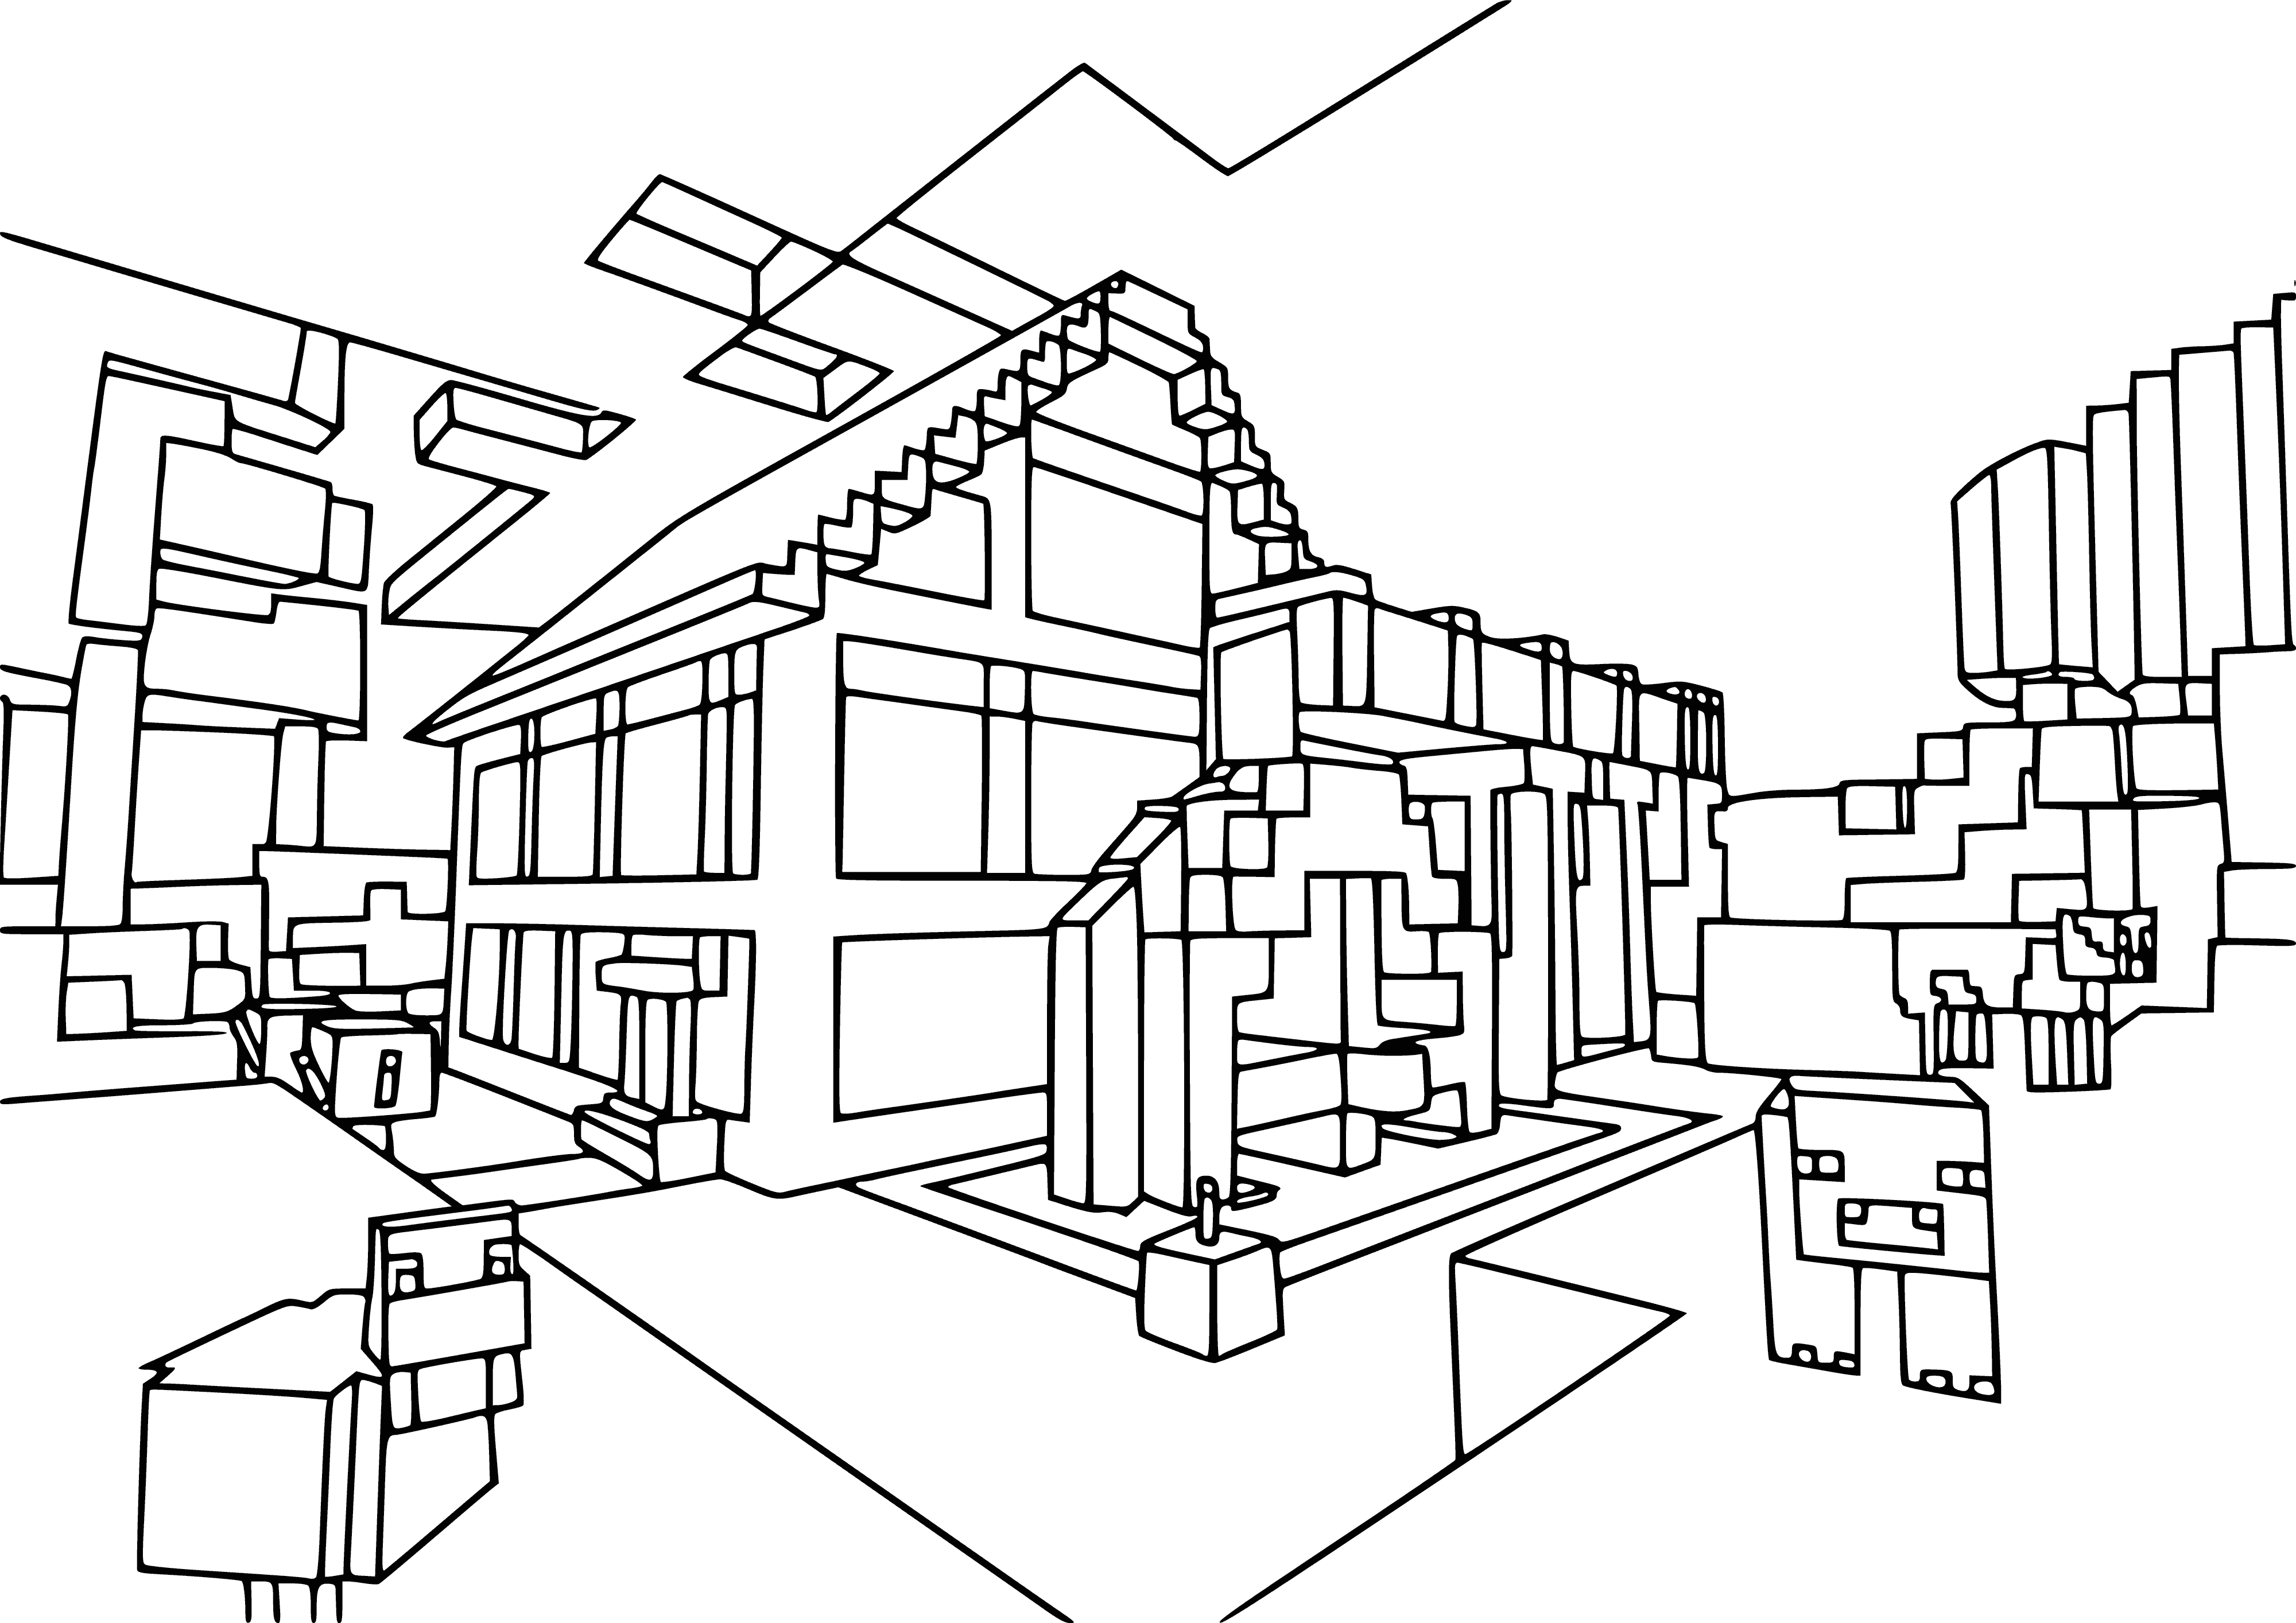 House in Minecraft coloring page